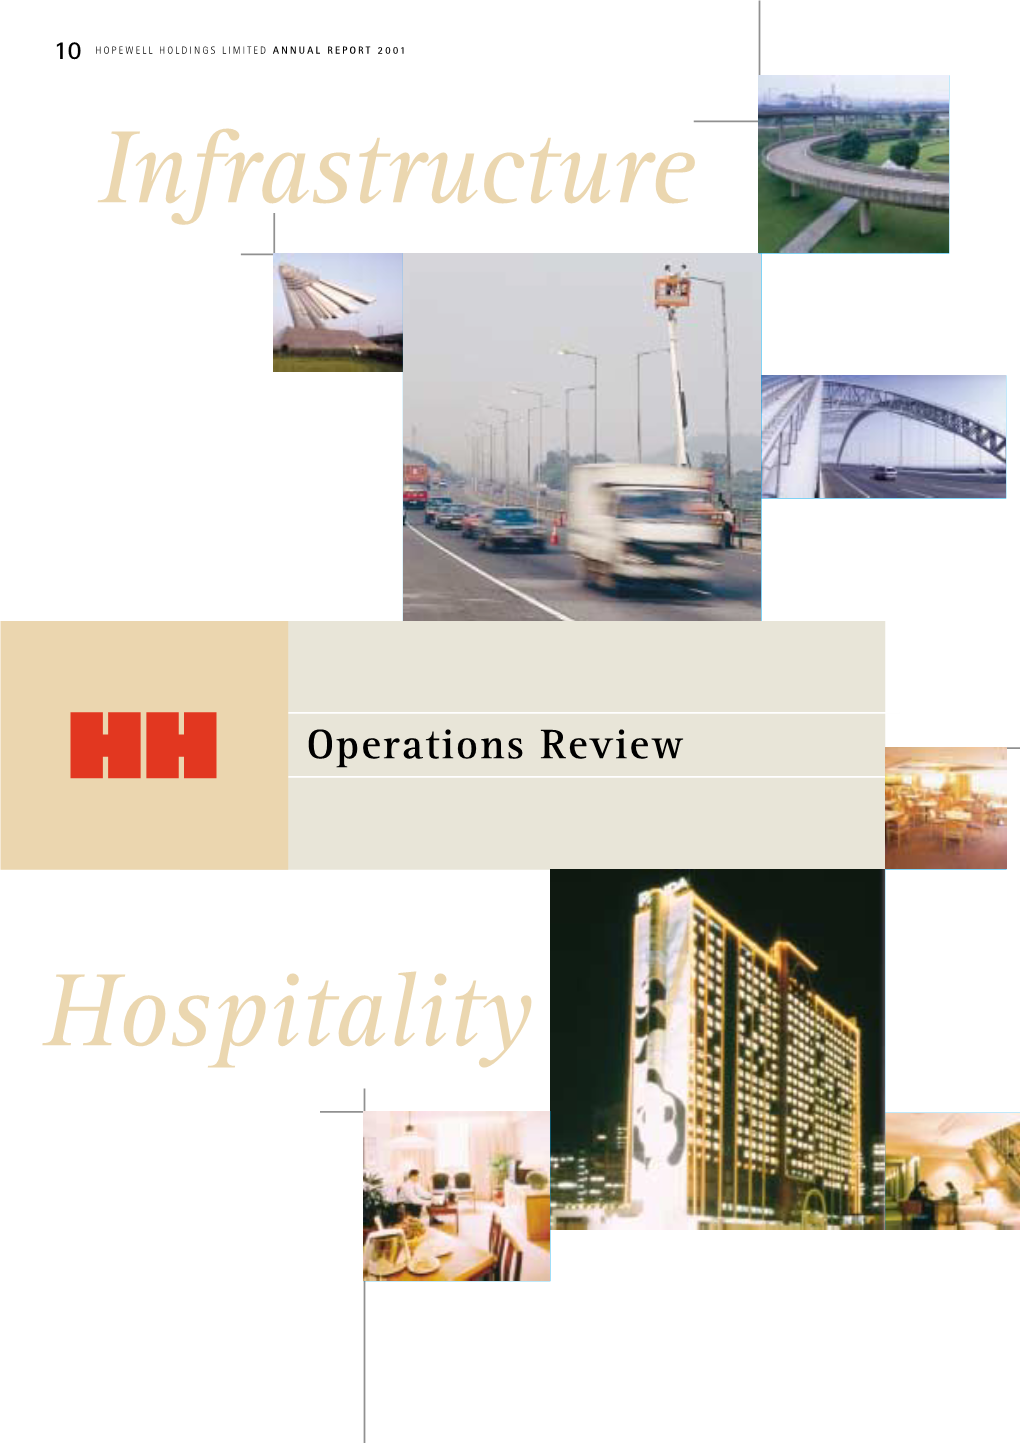 Hospitality Infrastructure